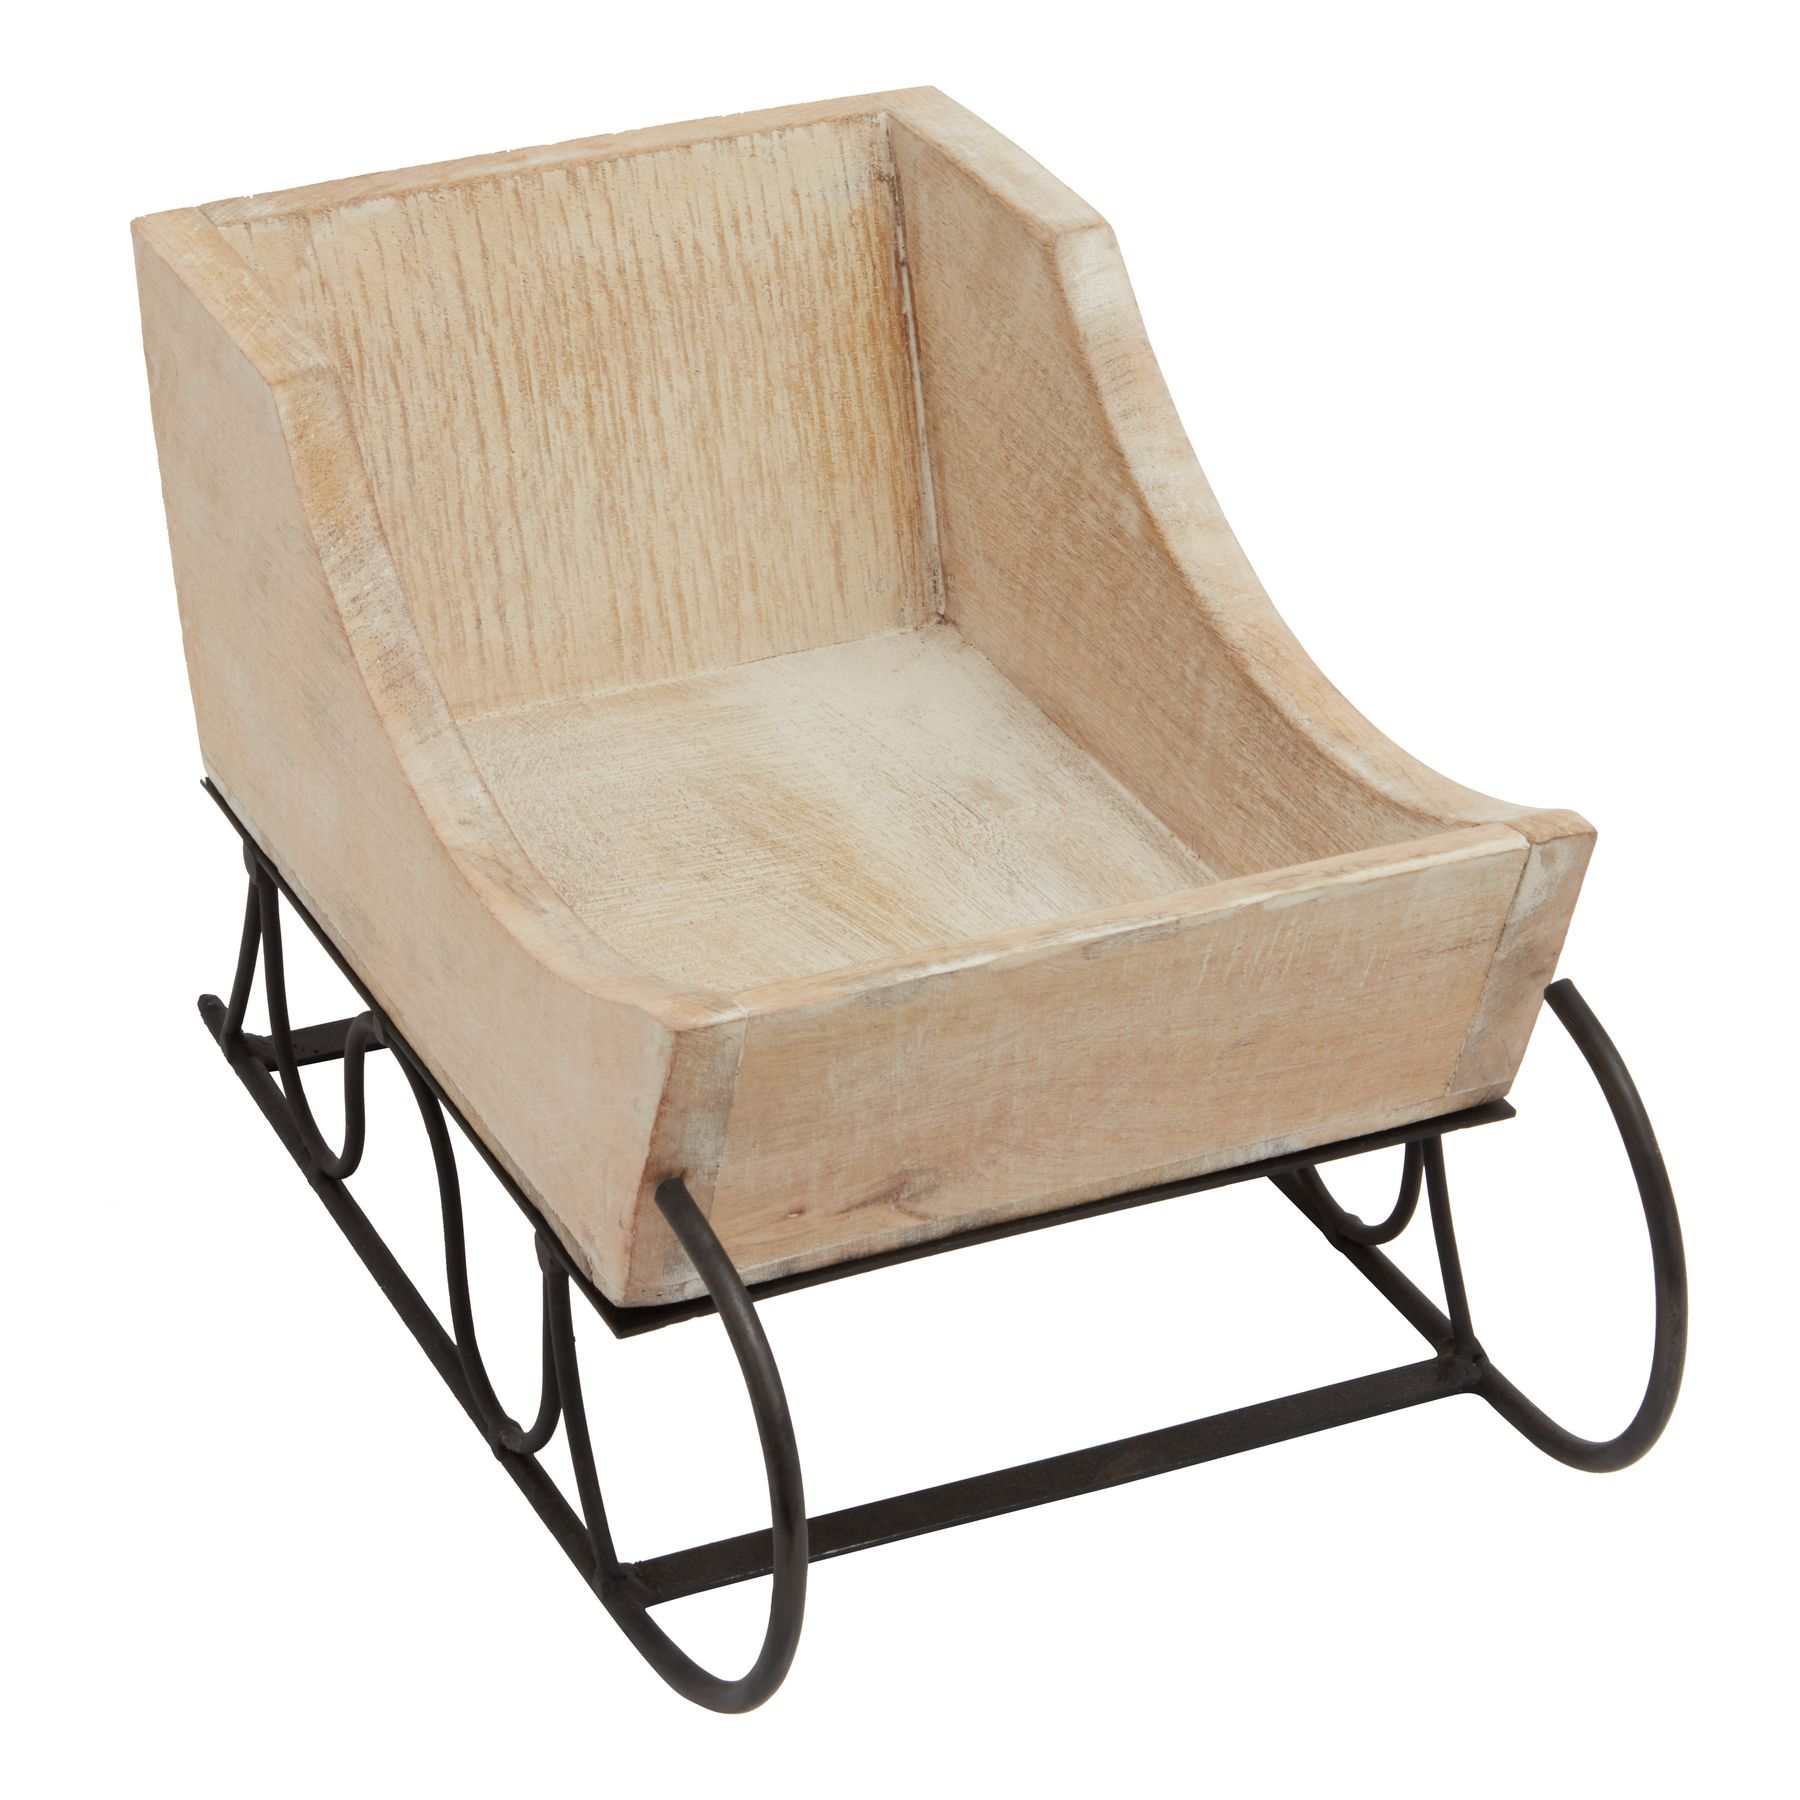 White Wash Collection Wooden Decorative Sleigh - Image 3